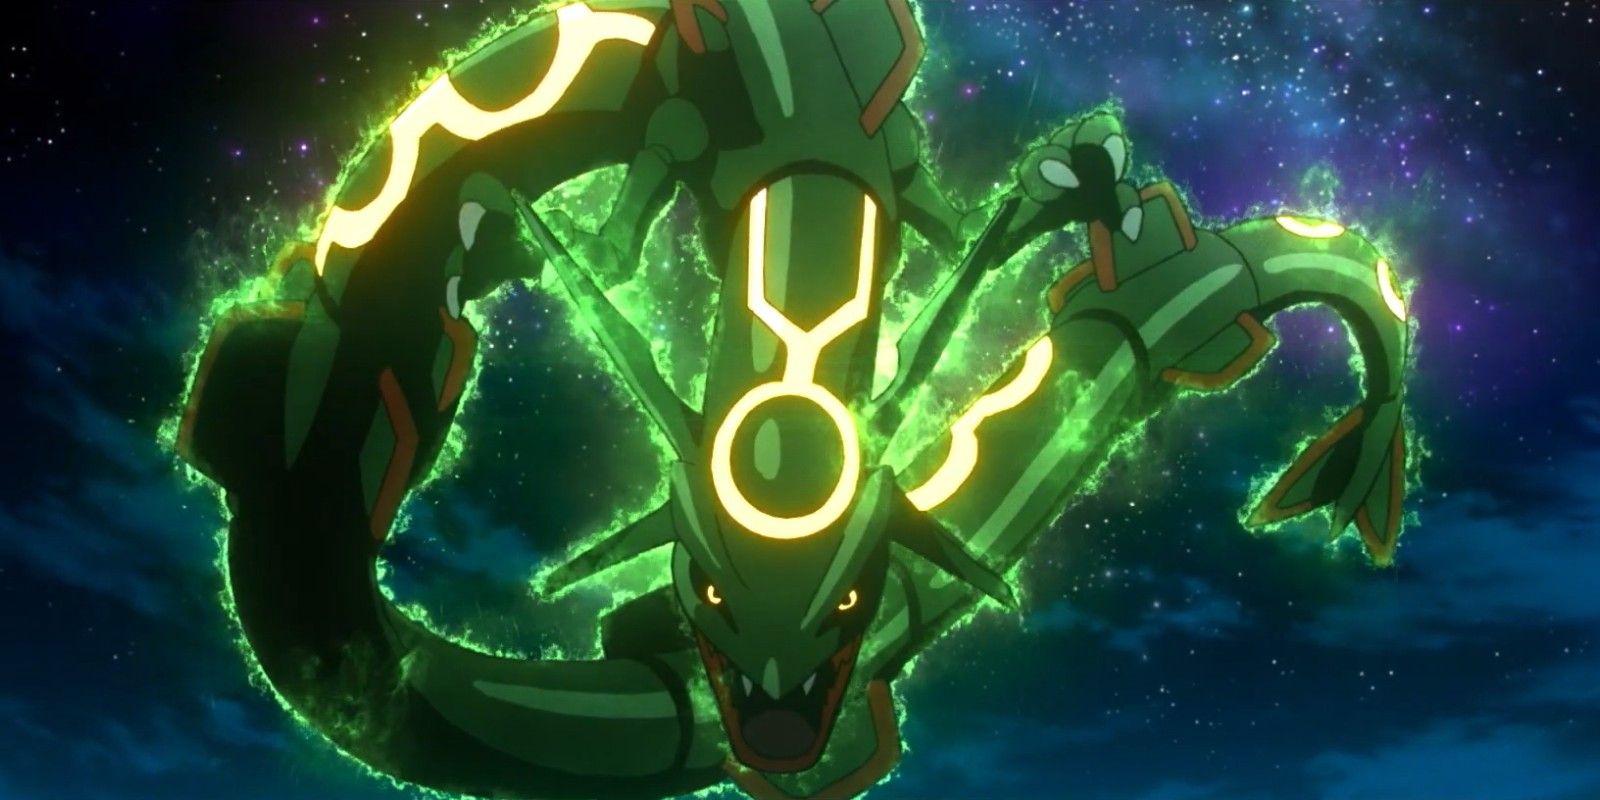 Pokémon's Rayquaza Becomes A Mecha In Awesome Fan Art